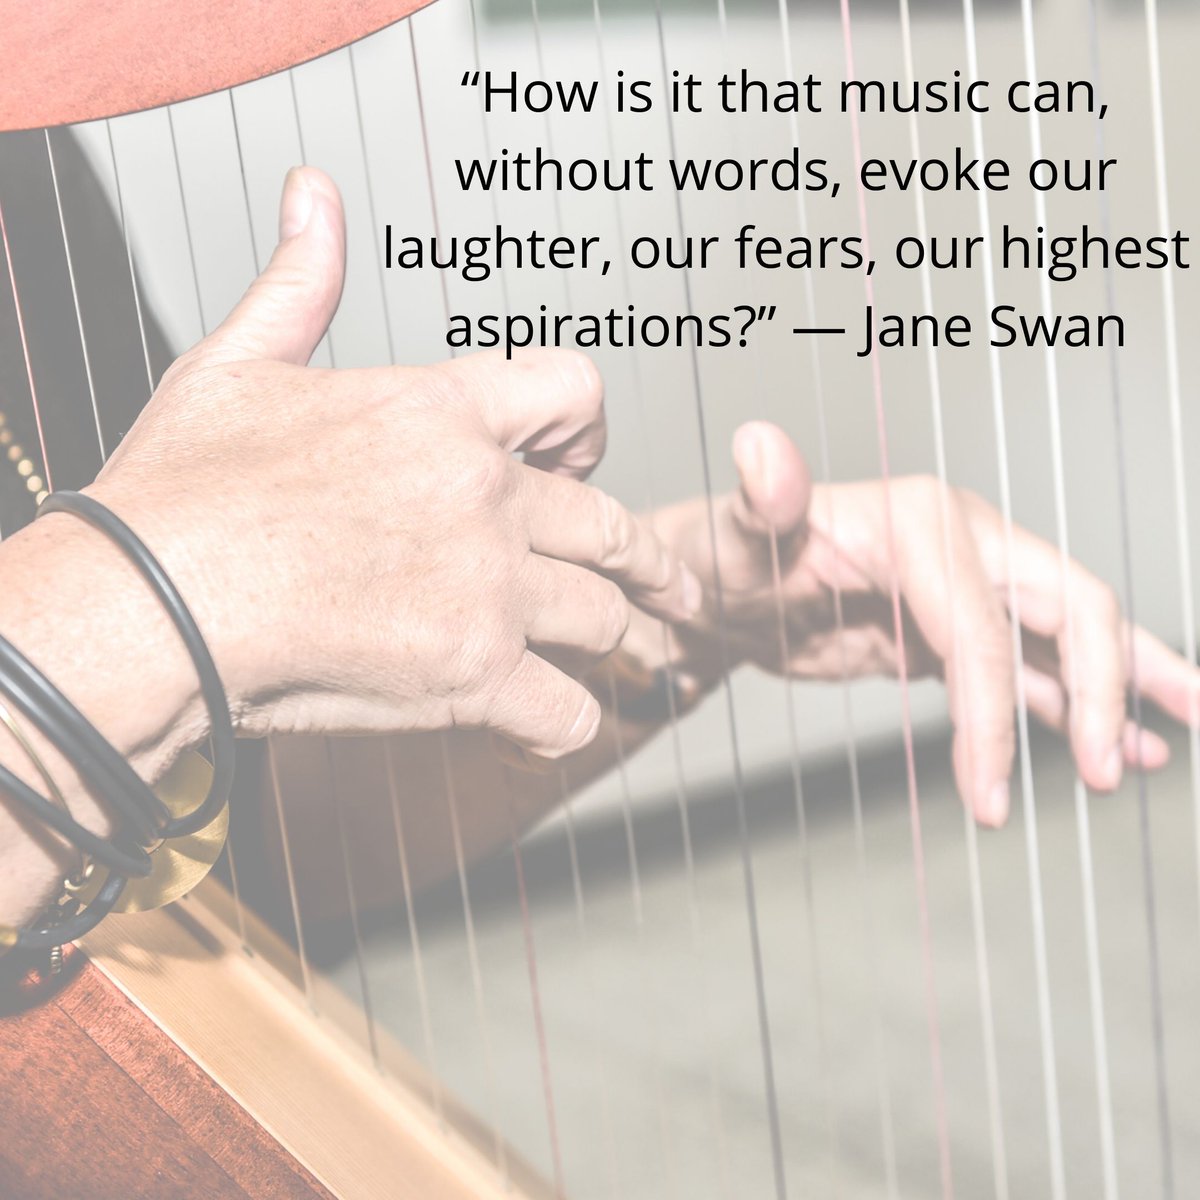 'How is it that music can, without words, evoke our laughter, our fears, our highest aspirations?' (Jane Swan)